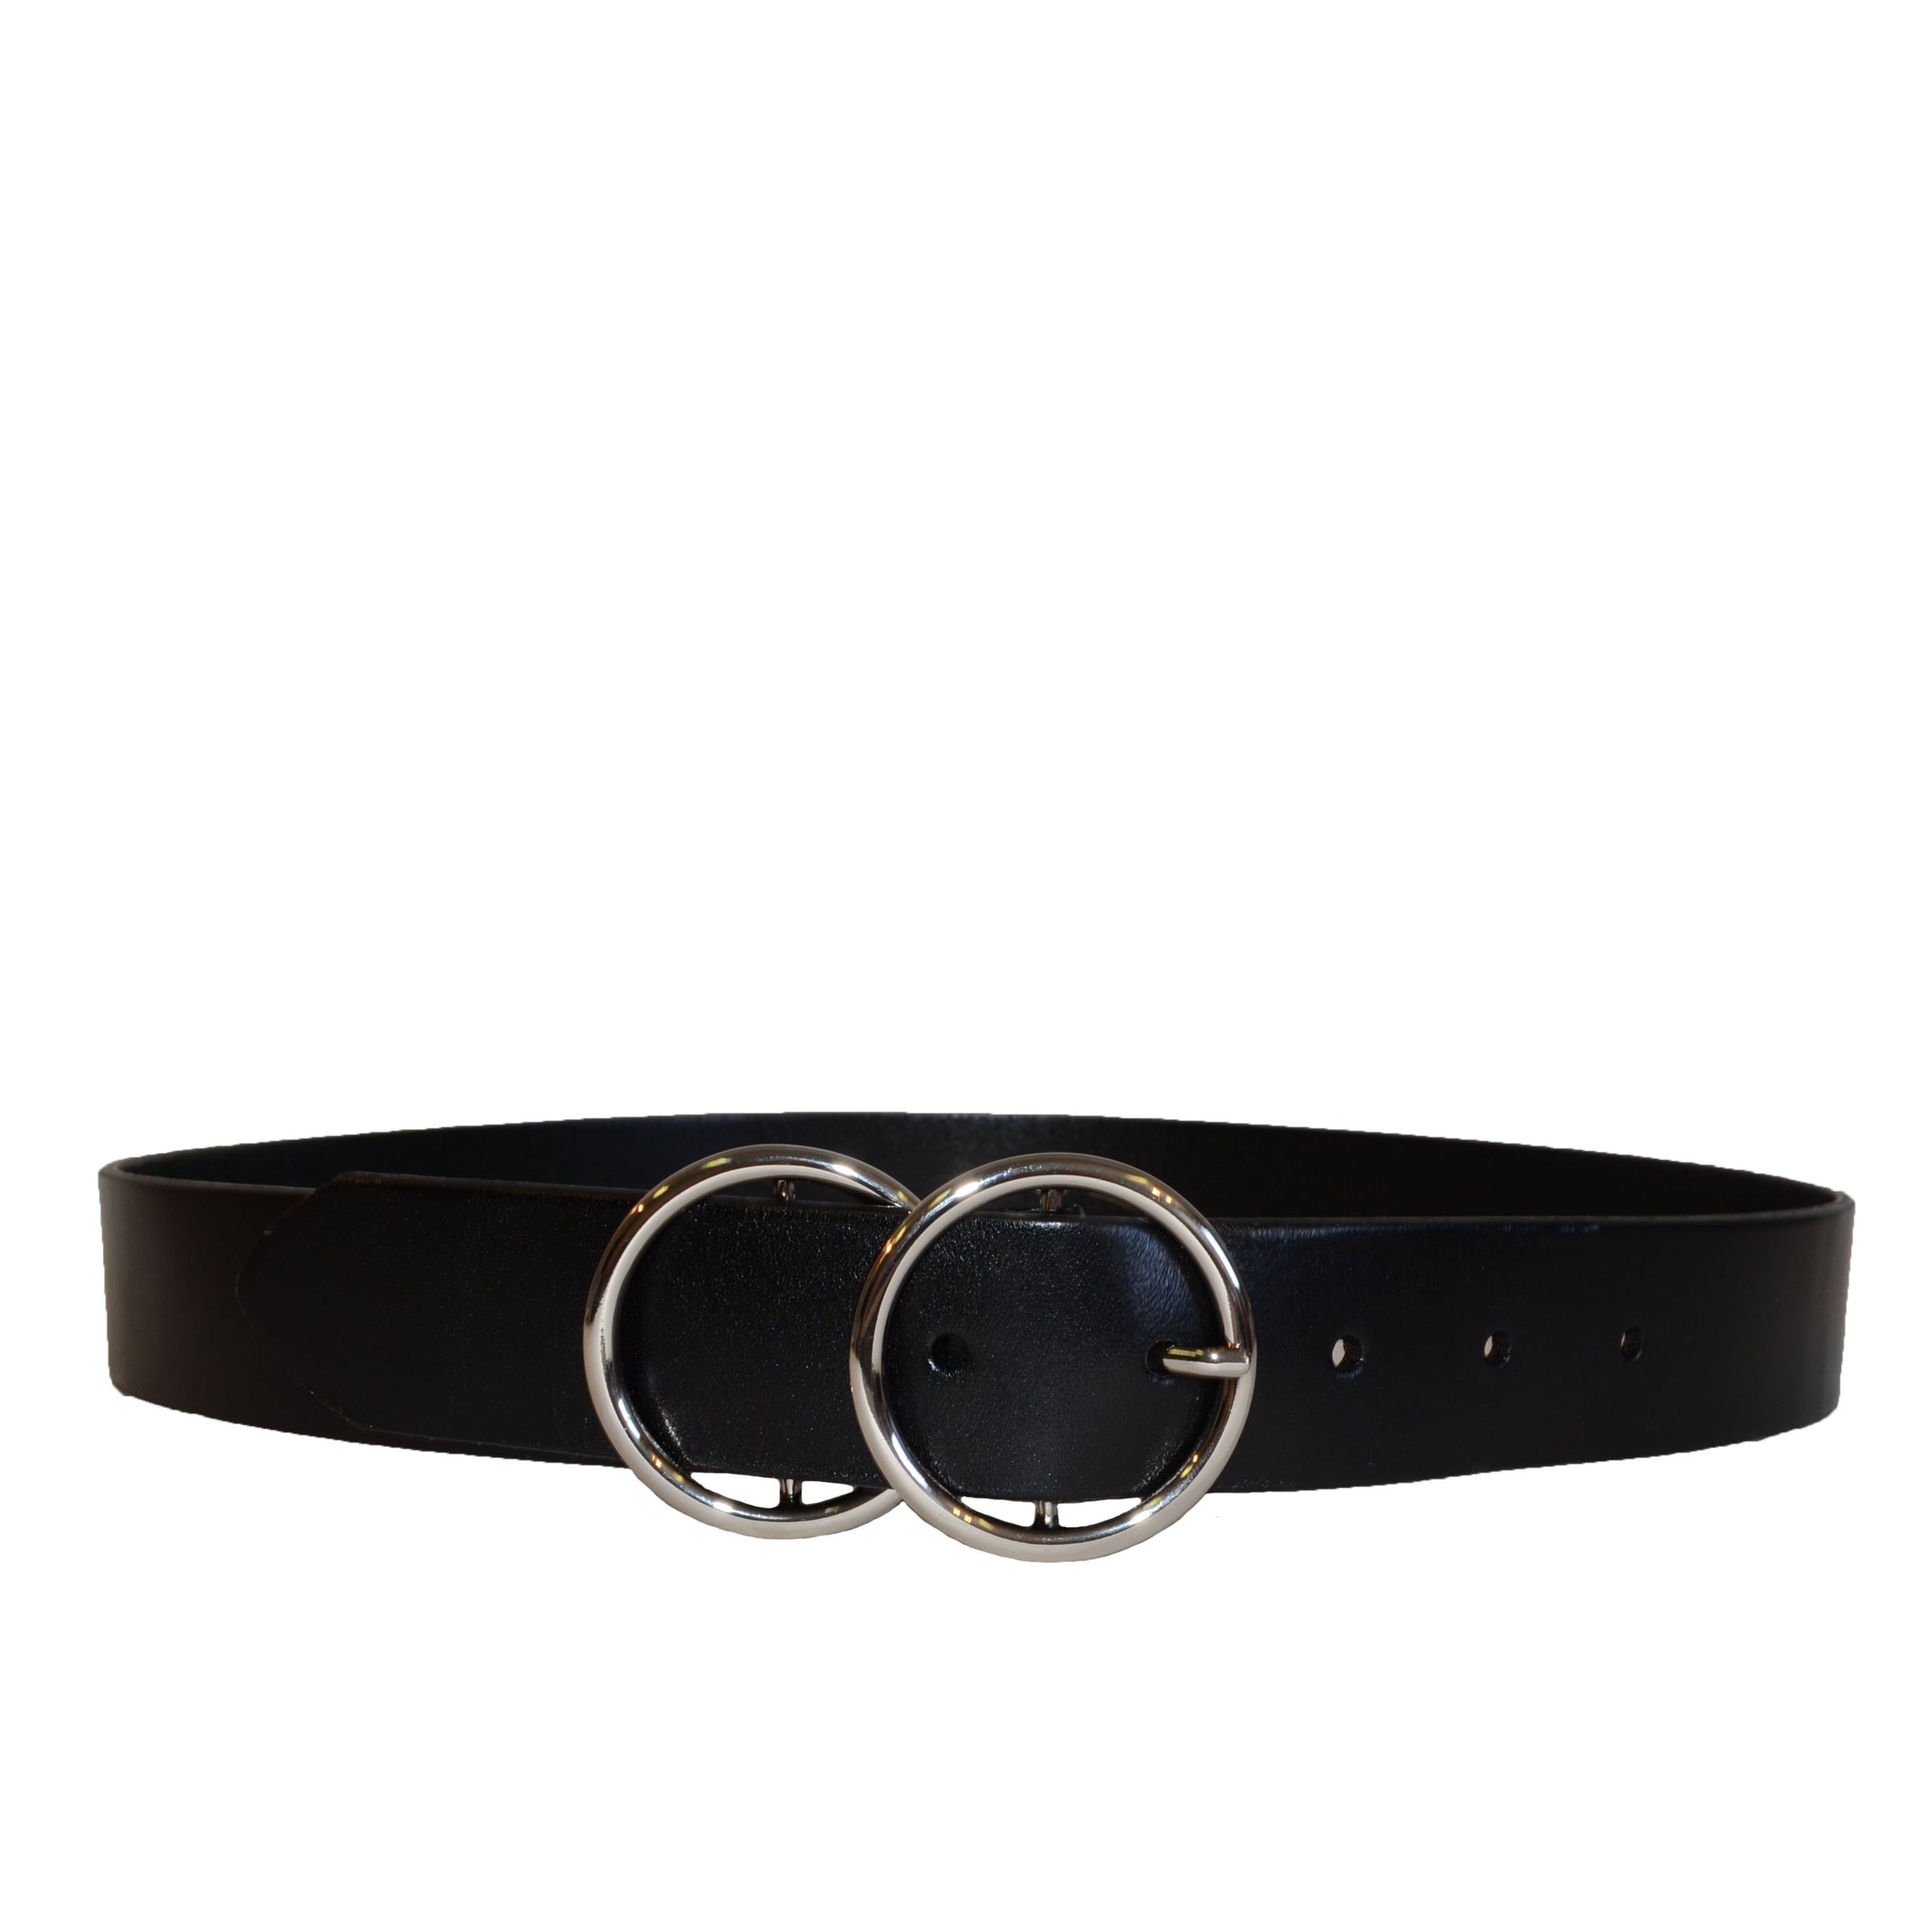 TOWNSVILLE - Womens Black Double Ring Leather Belt Belts Addison Road